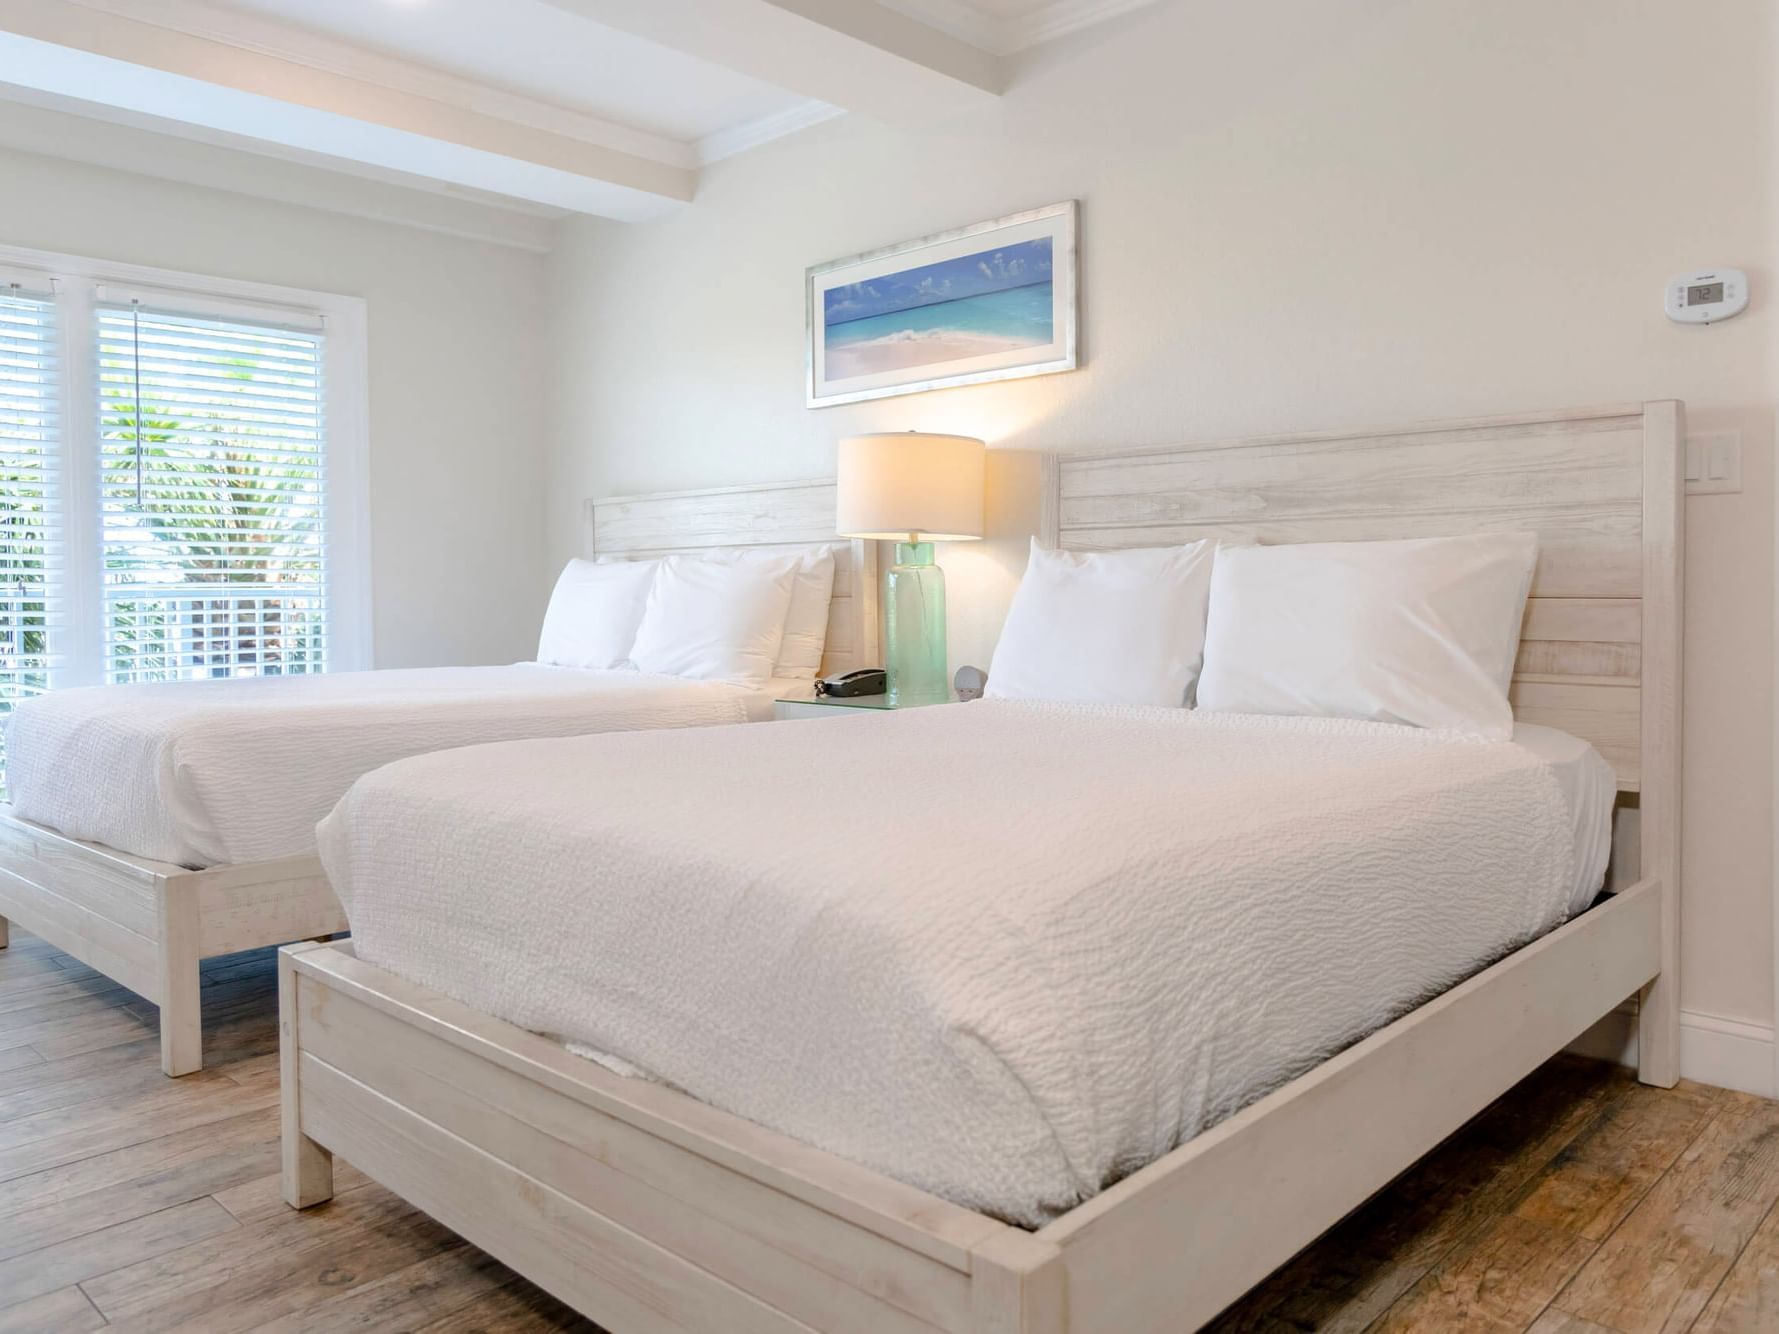 Double Beds in Studio at Legacy Vacation Resorts, Indian Shores